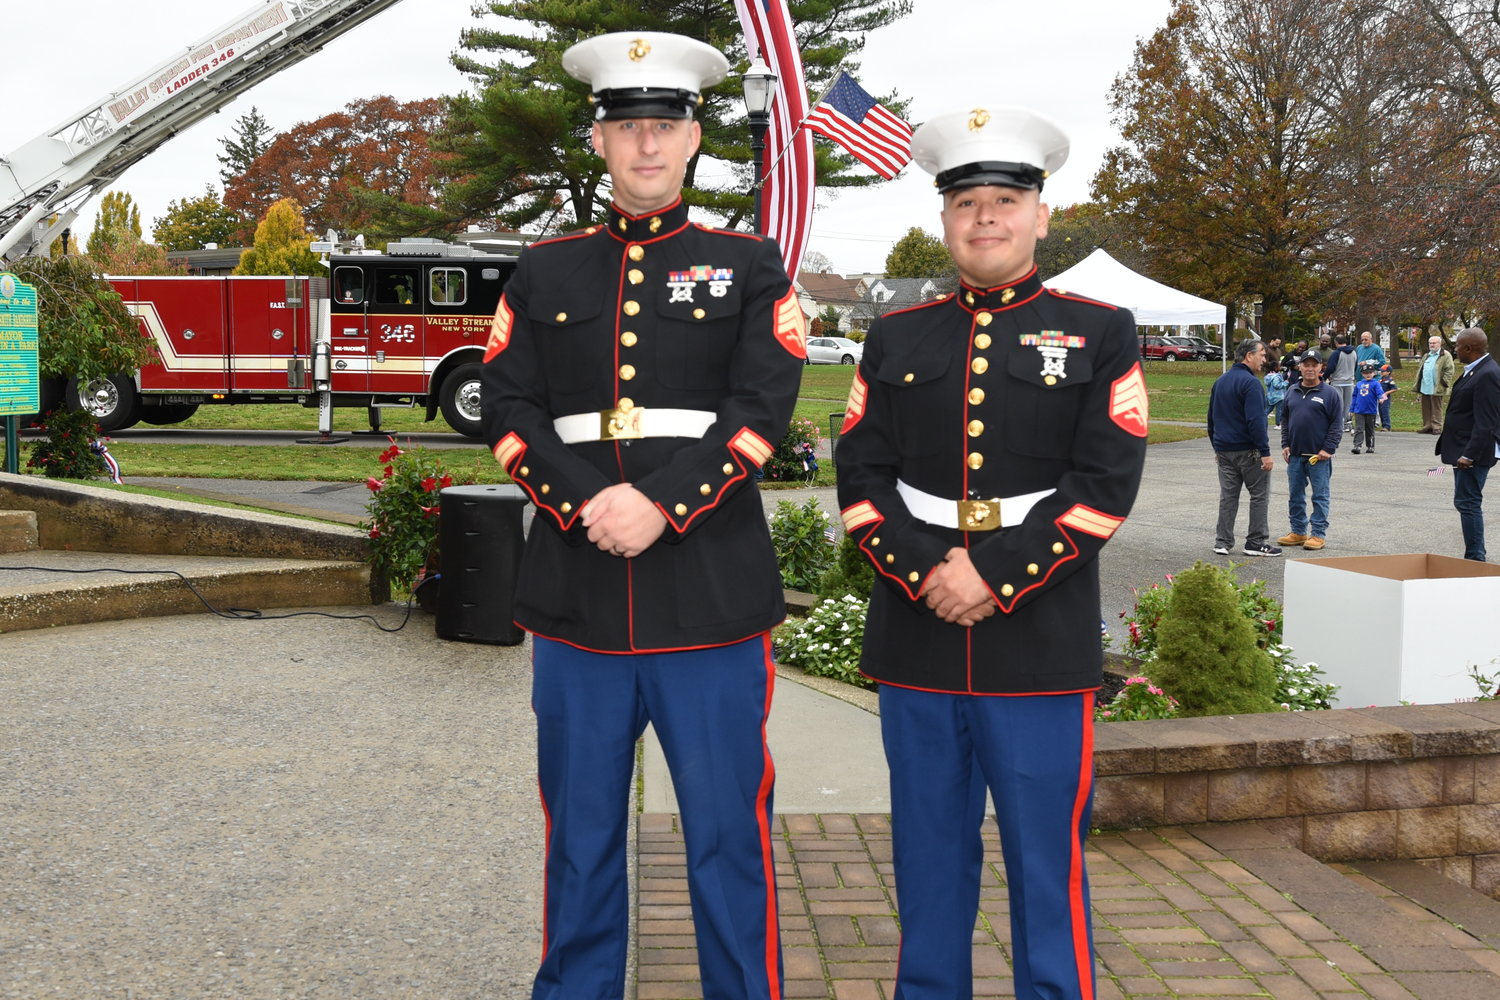 Marine Sargent Jason Dunn and Carlos Yales joined in saluting veterans and fellow service members at the alley Stream Veterans Day celebration.